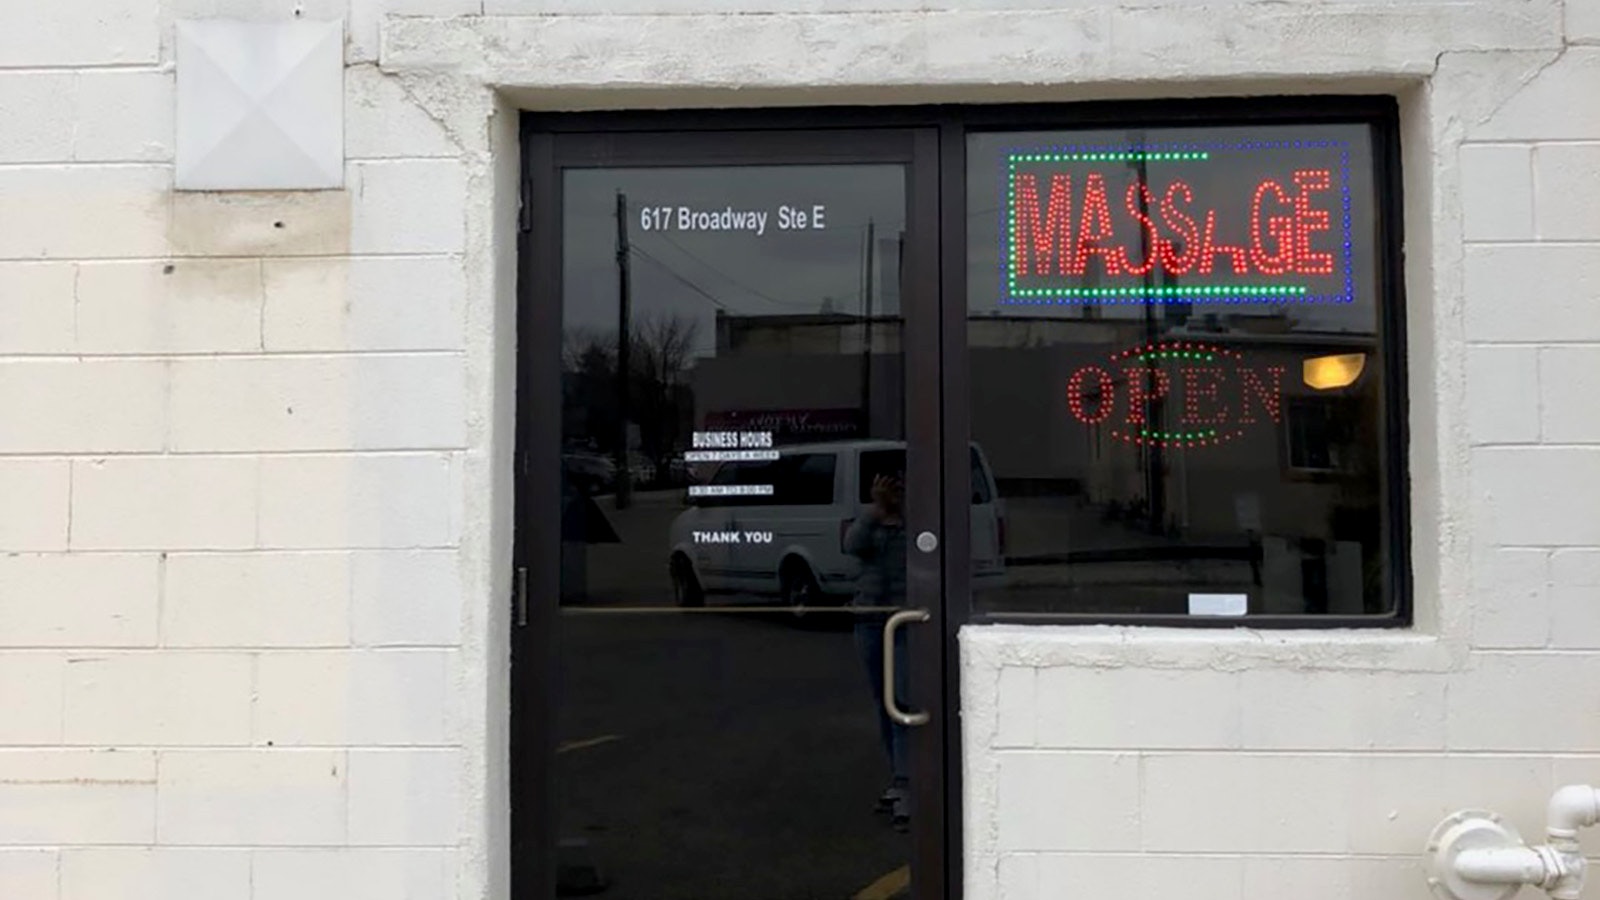 Asian Massage at 617 Broadway St. in Rock Springs was raided Tuesday after a months-long investigation into suspicions of sex trafficking.